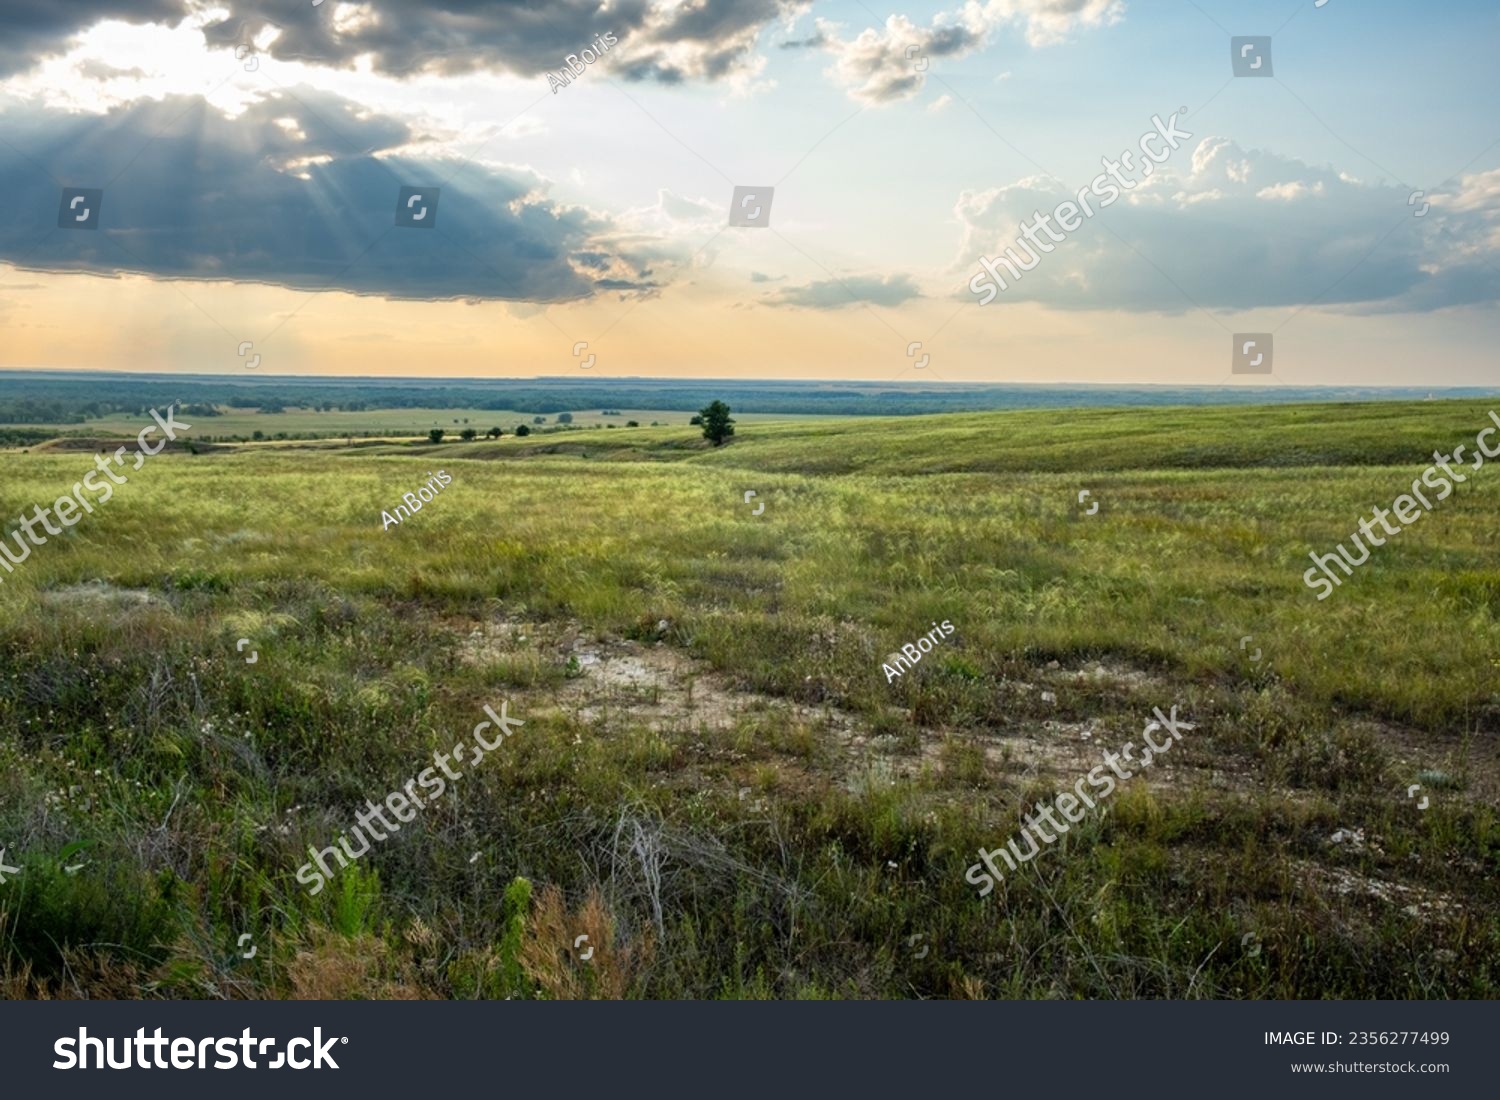 Landscape, evening, beautiful sky before sunset, steppe and ravines, trees on the horizon, bank of the Don River, Volgograd region, Russia.
 #2356277499